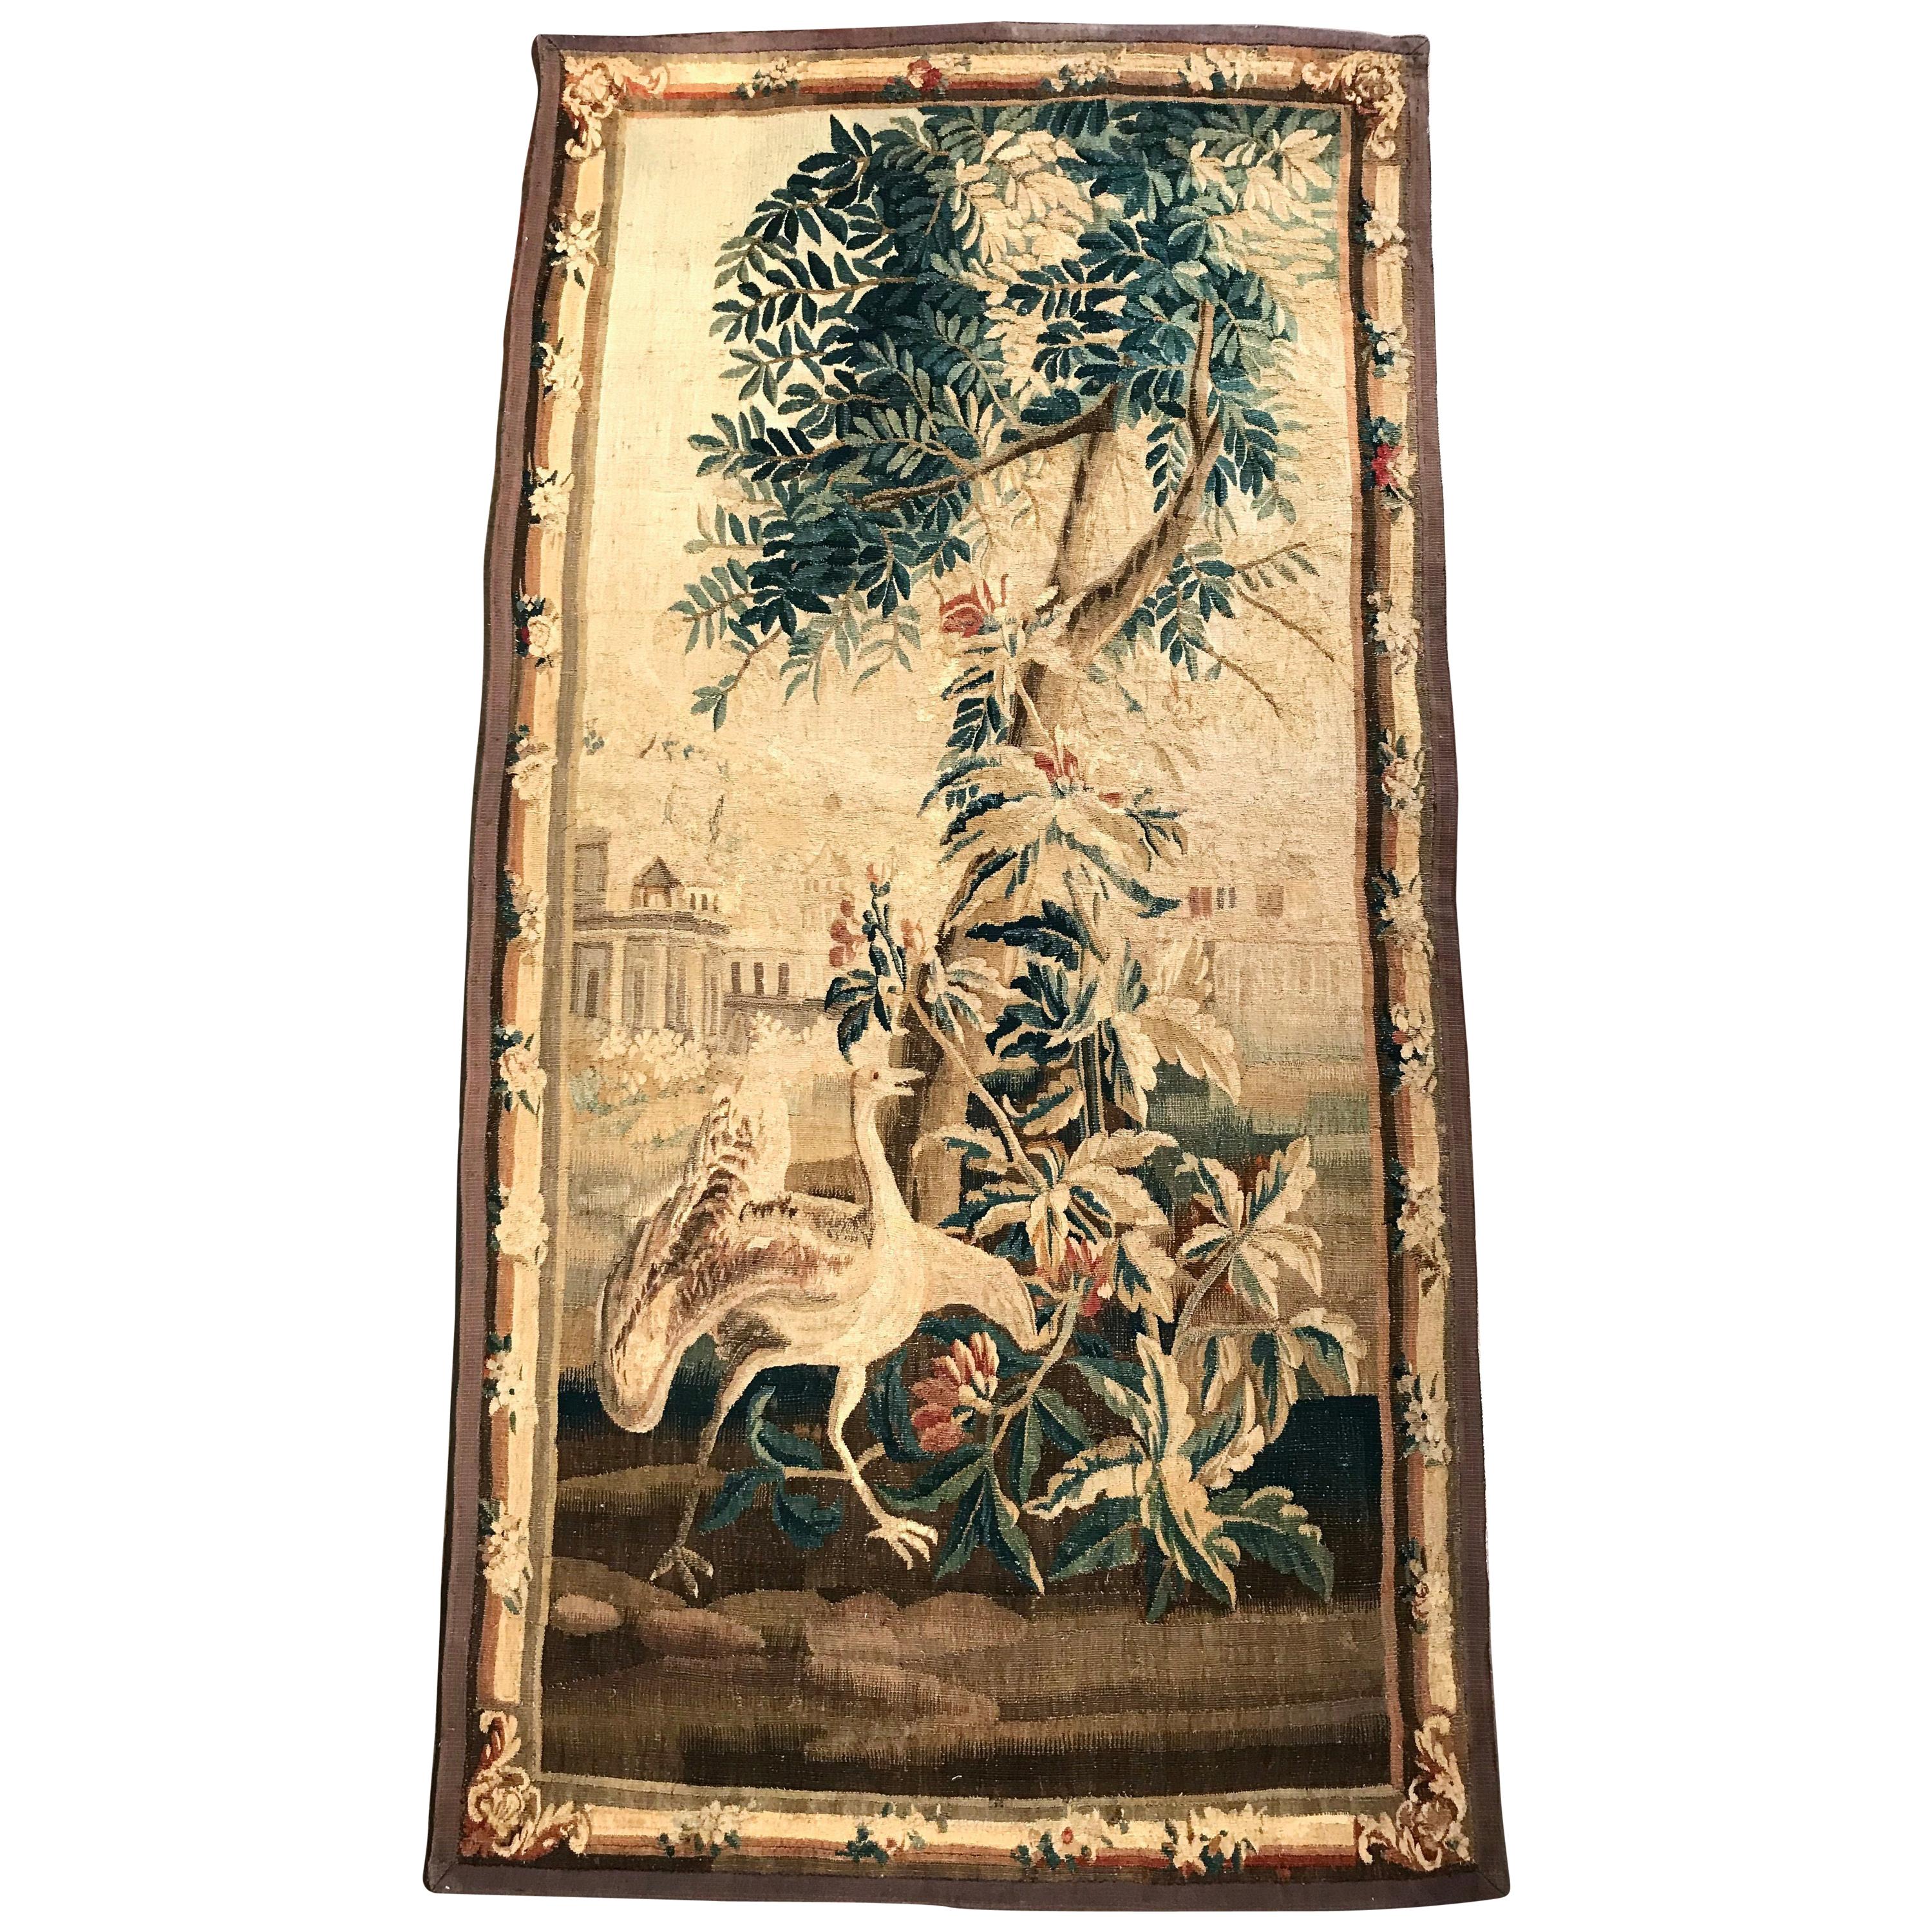 Long and Narrow 18th Century French Verdure Aubusson Tapestry with Ostrich